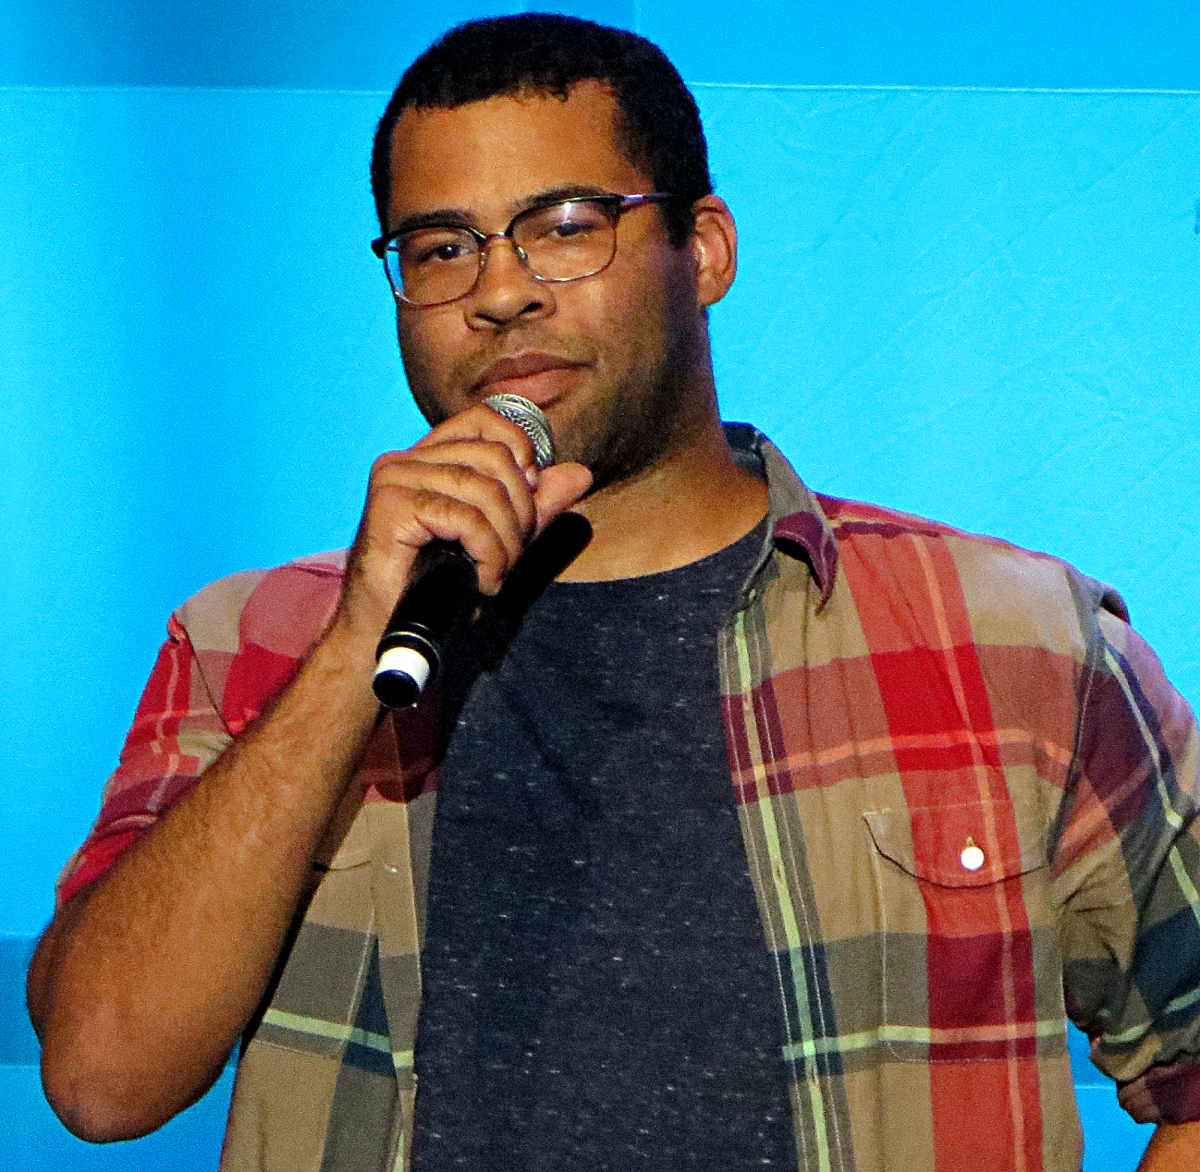 Jordan Peele might be the most powerful Black writer in Hollywood.